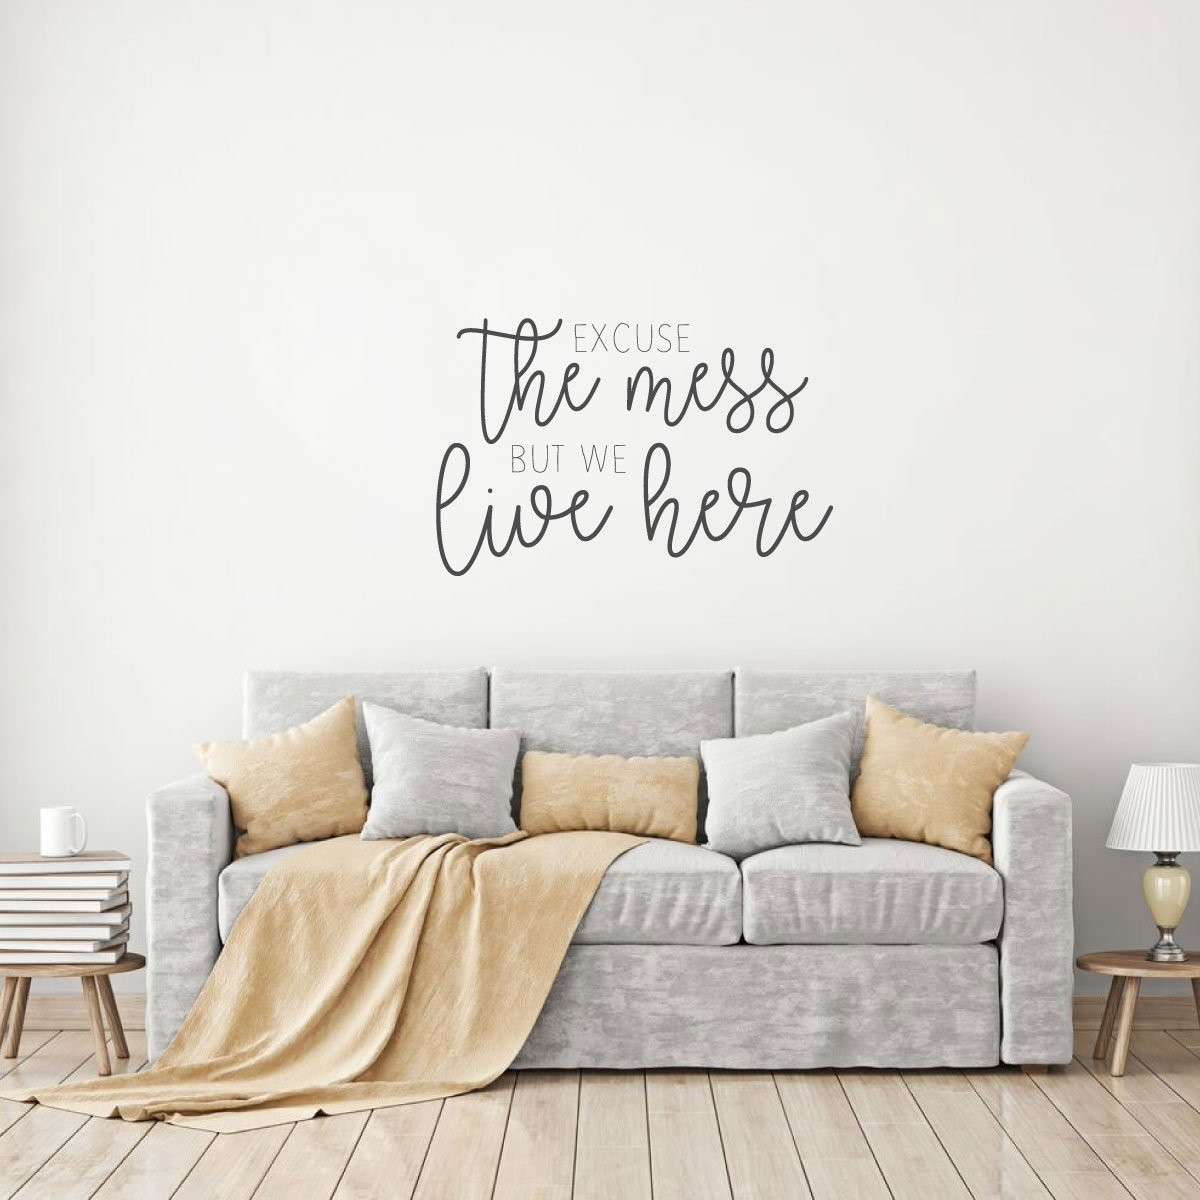 Living Room Wall Decal
 Excuse the Mess Quote for Living Room Vinyl Home Decor